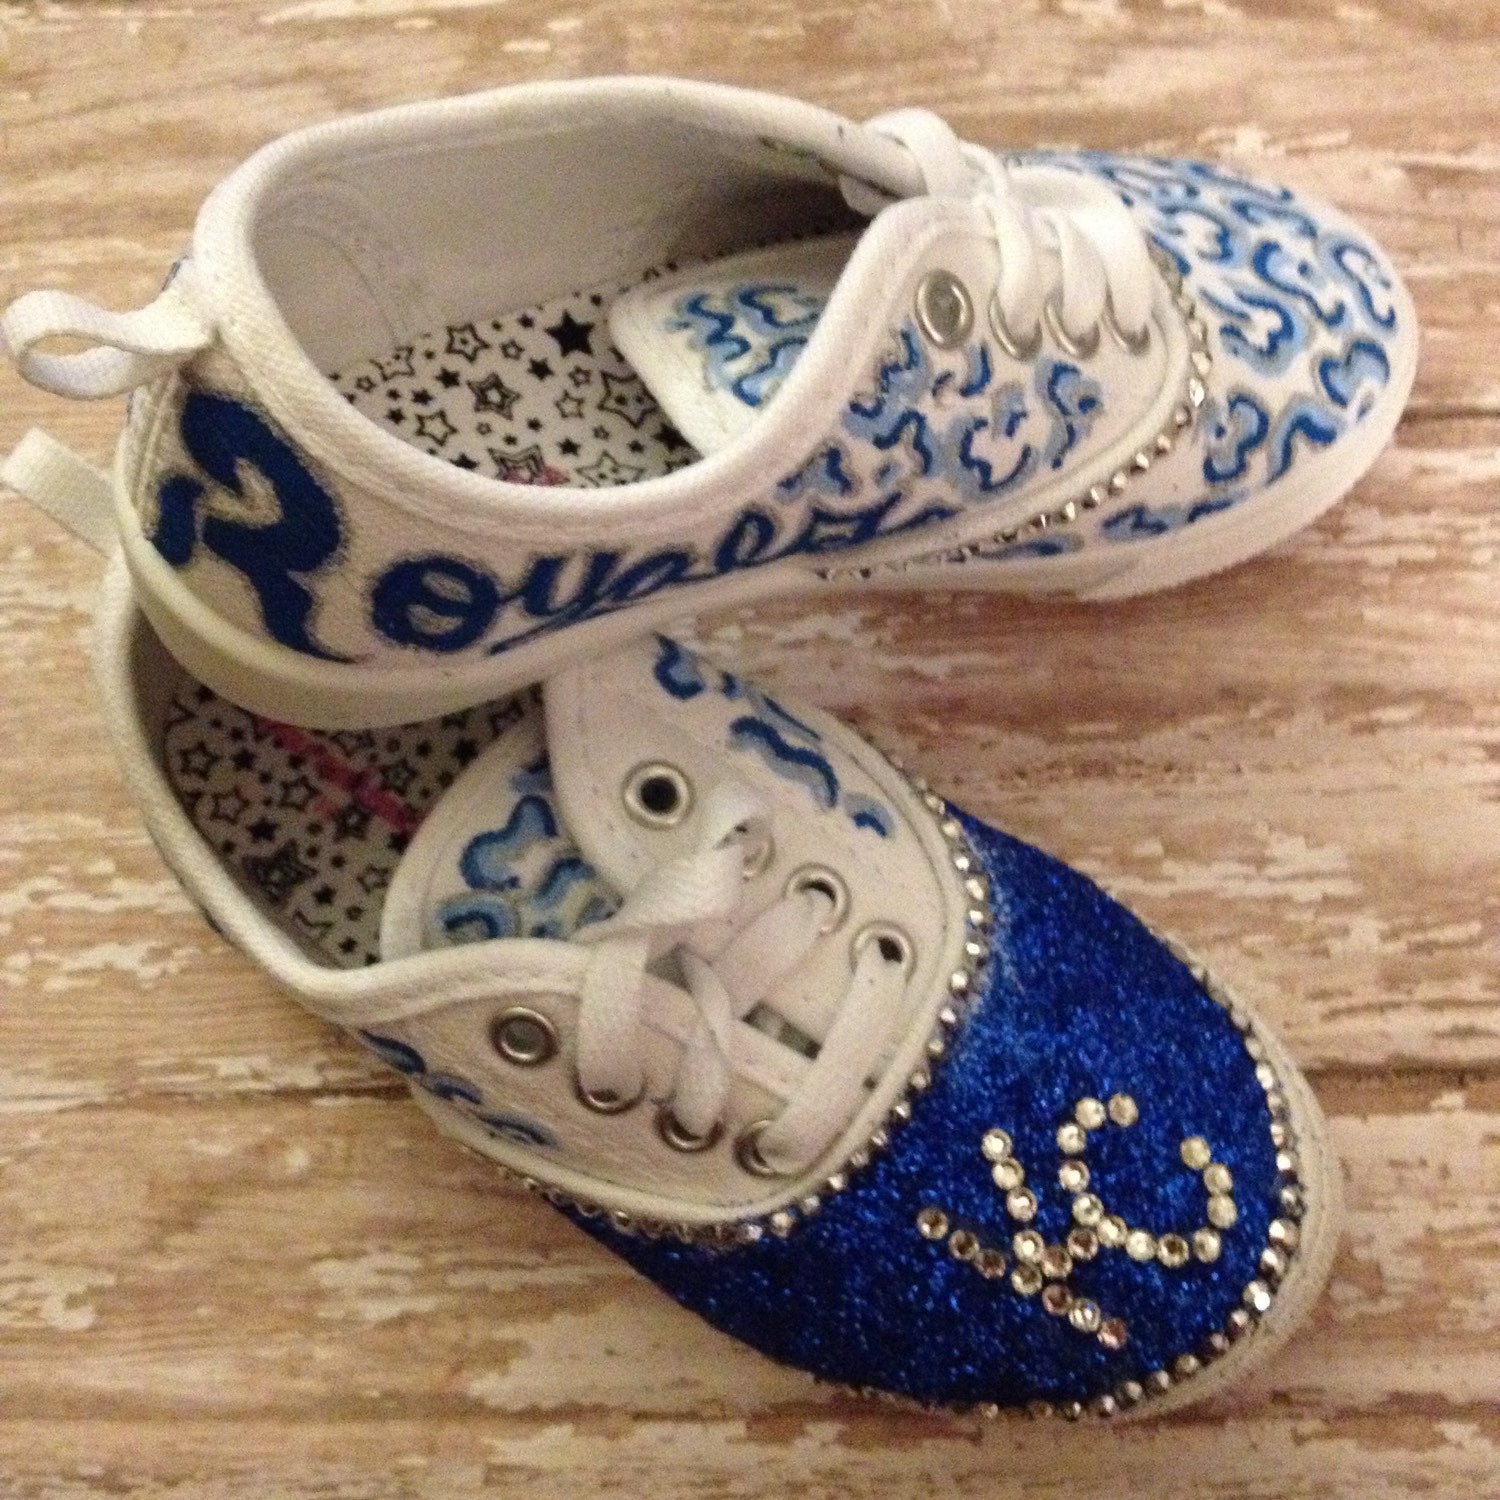 Chidrens royals inspired shoes Hand Painted Kansas City